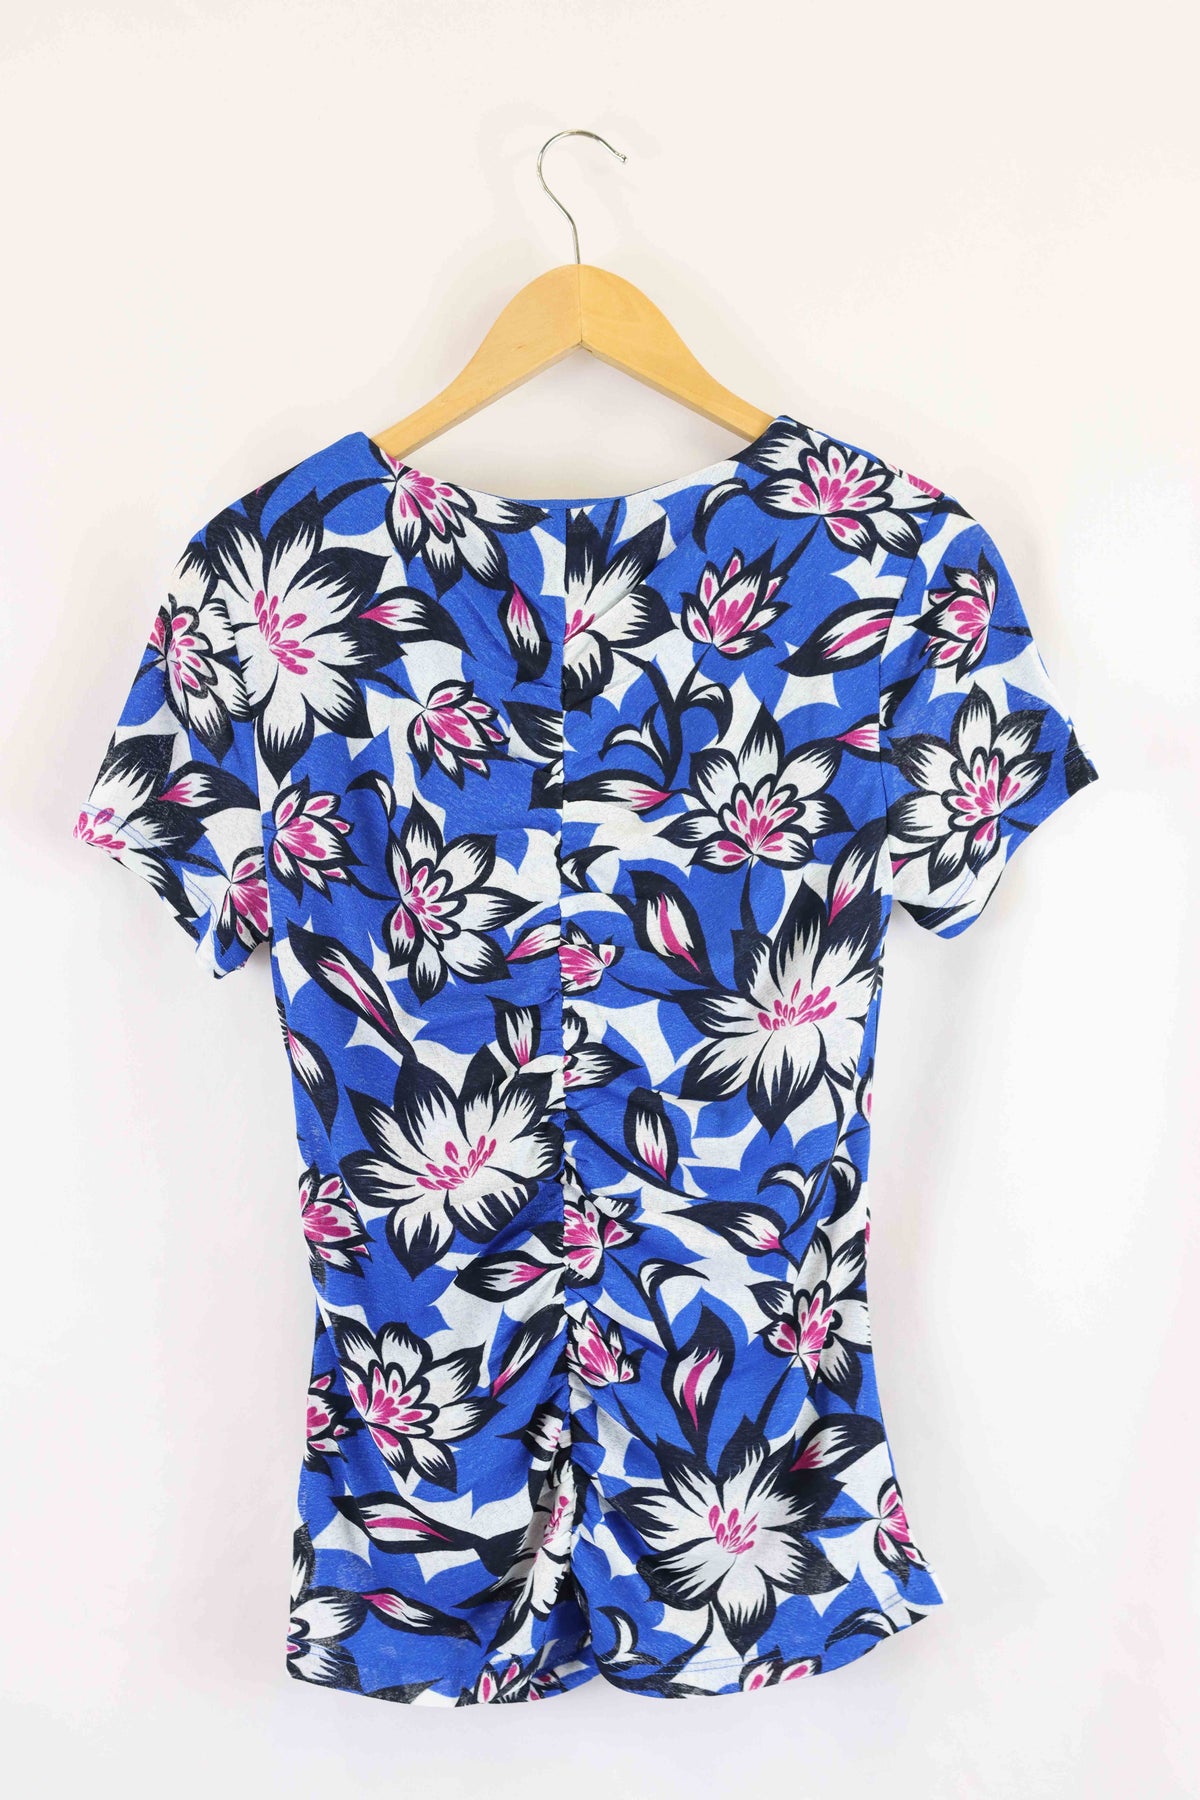 Witchery Floral Blue Top M